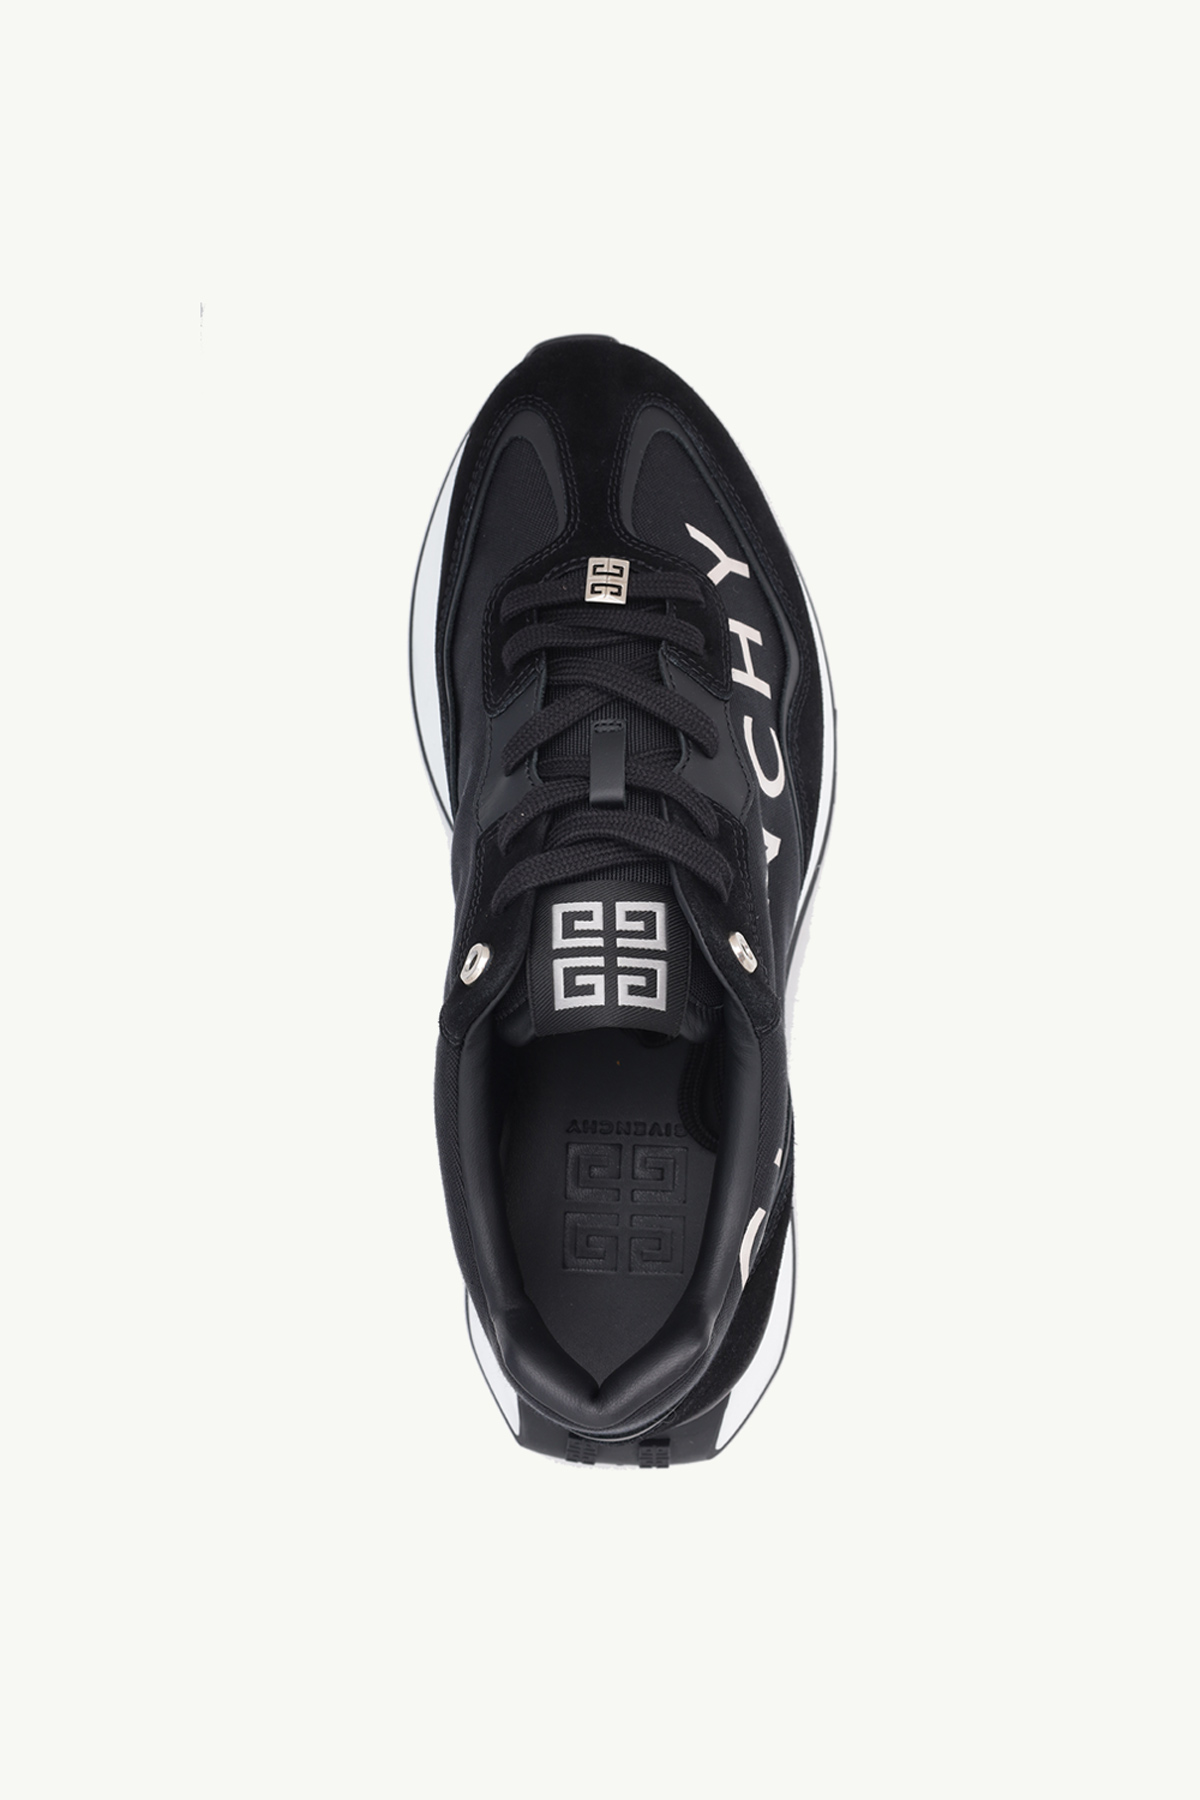 GIVENCHY Men GIV Runner Sneakers in Black/White Suede x Nylon 3